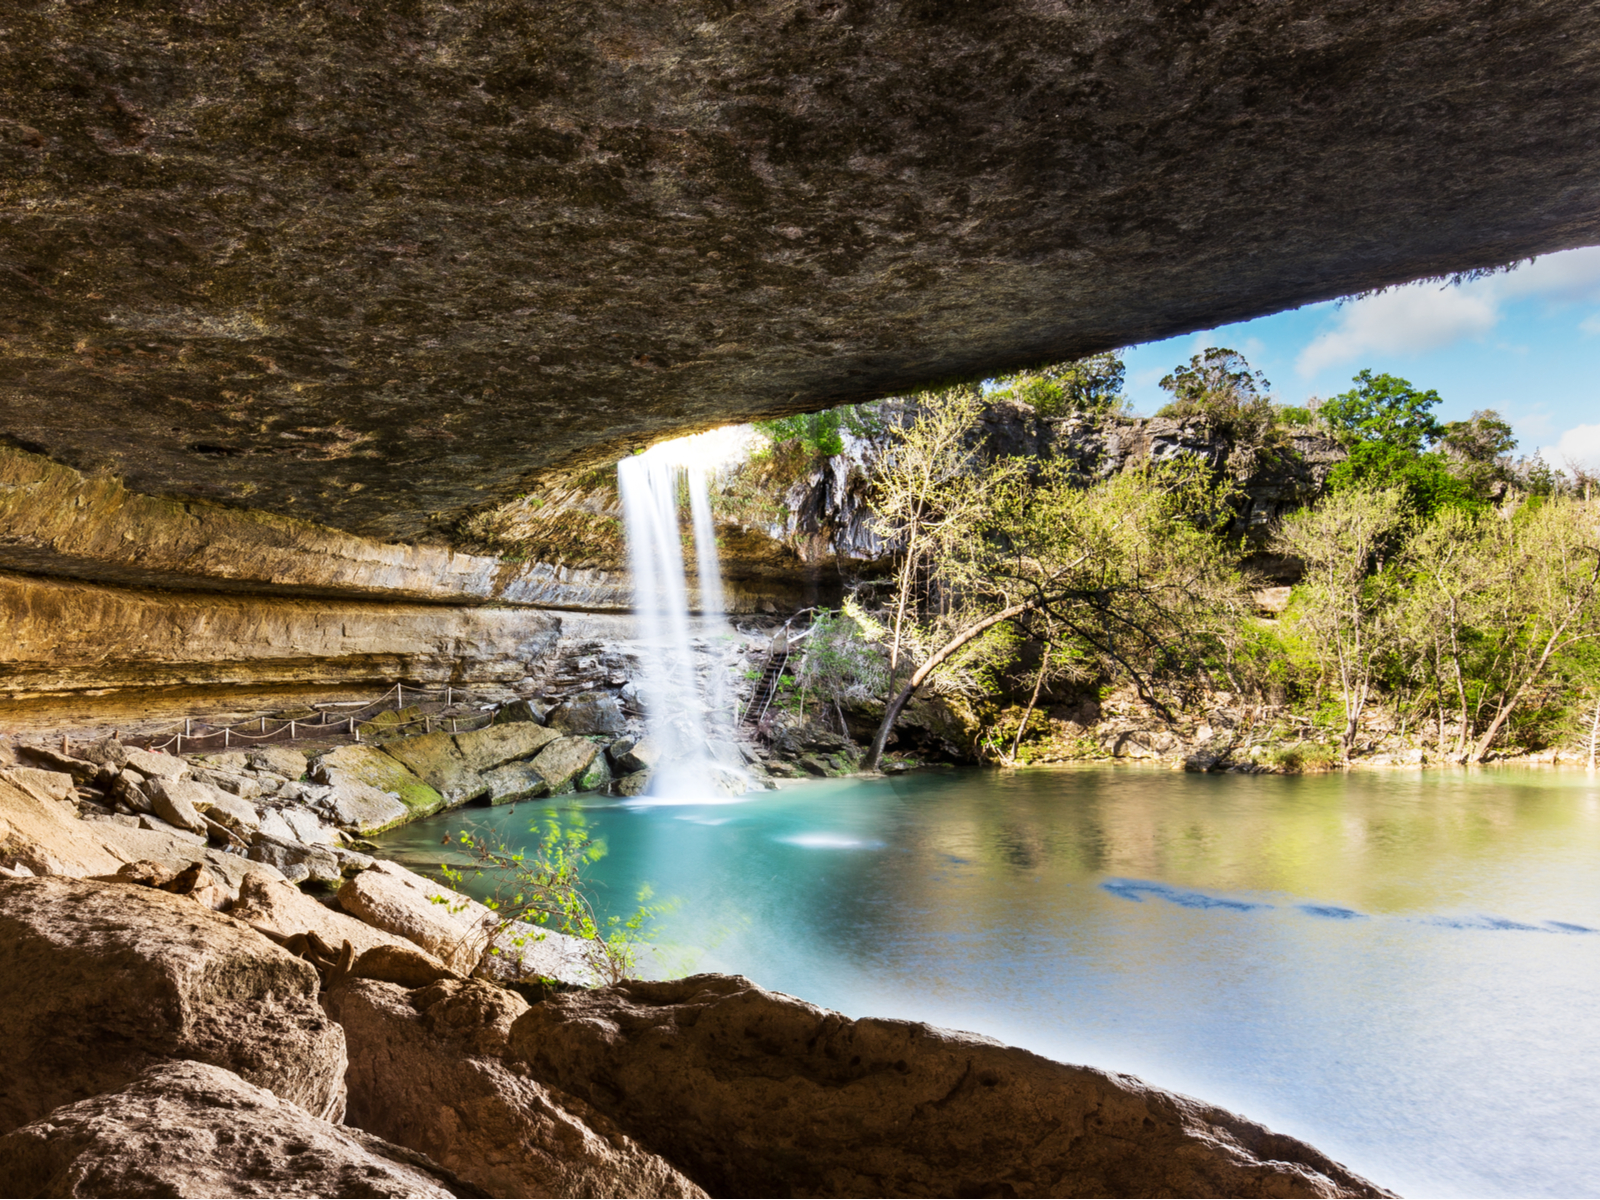 Grotto at the Hamilton Pool Preserve, one of Texas's best things to do